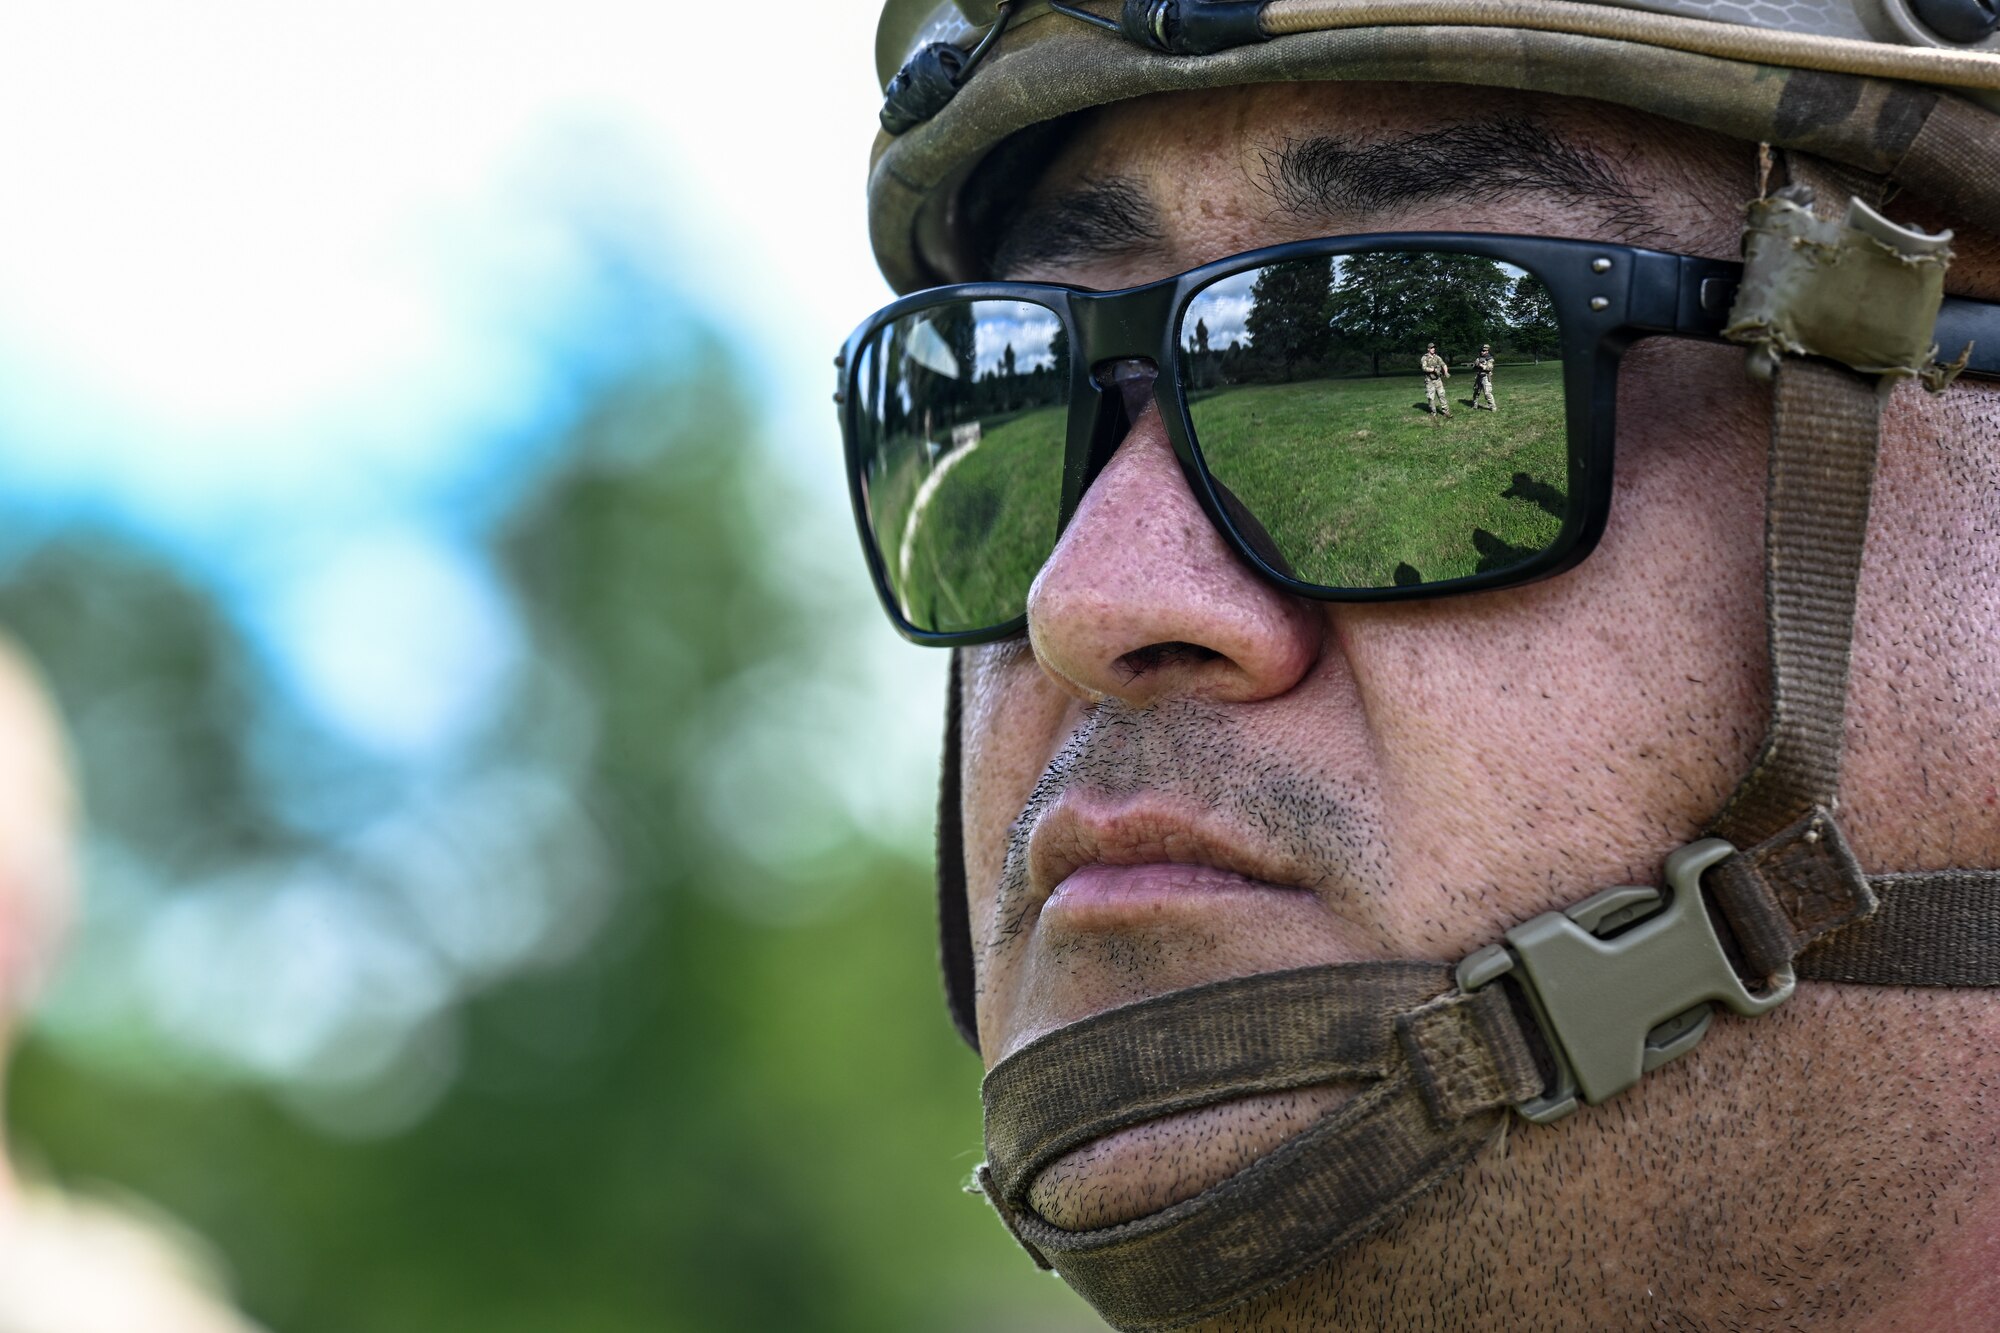 Senior Airman Jose Leos, a Defender assigned to the Texas Air National Guard’s 204th Security Forces Squadron, listens to an Integrated Defense Leadership Course grenade safety briefing on Aug. 15, 2023, at Camp James A. Garfield Joint Military Training Center, Ohio.